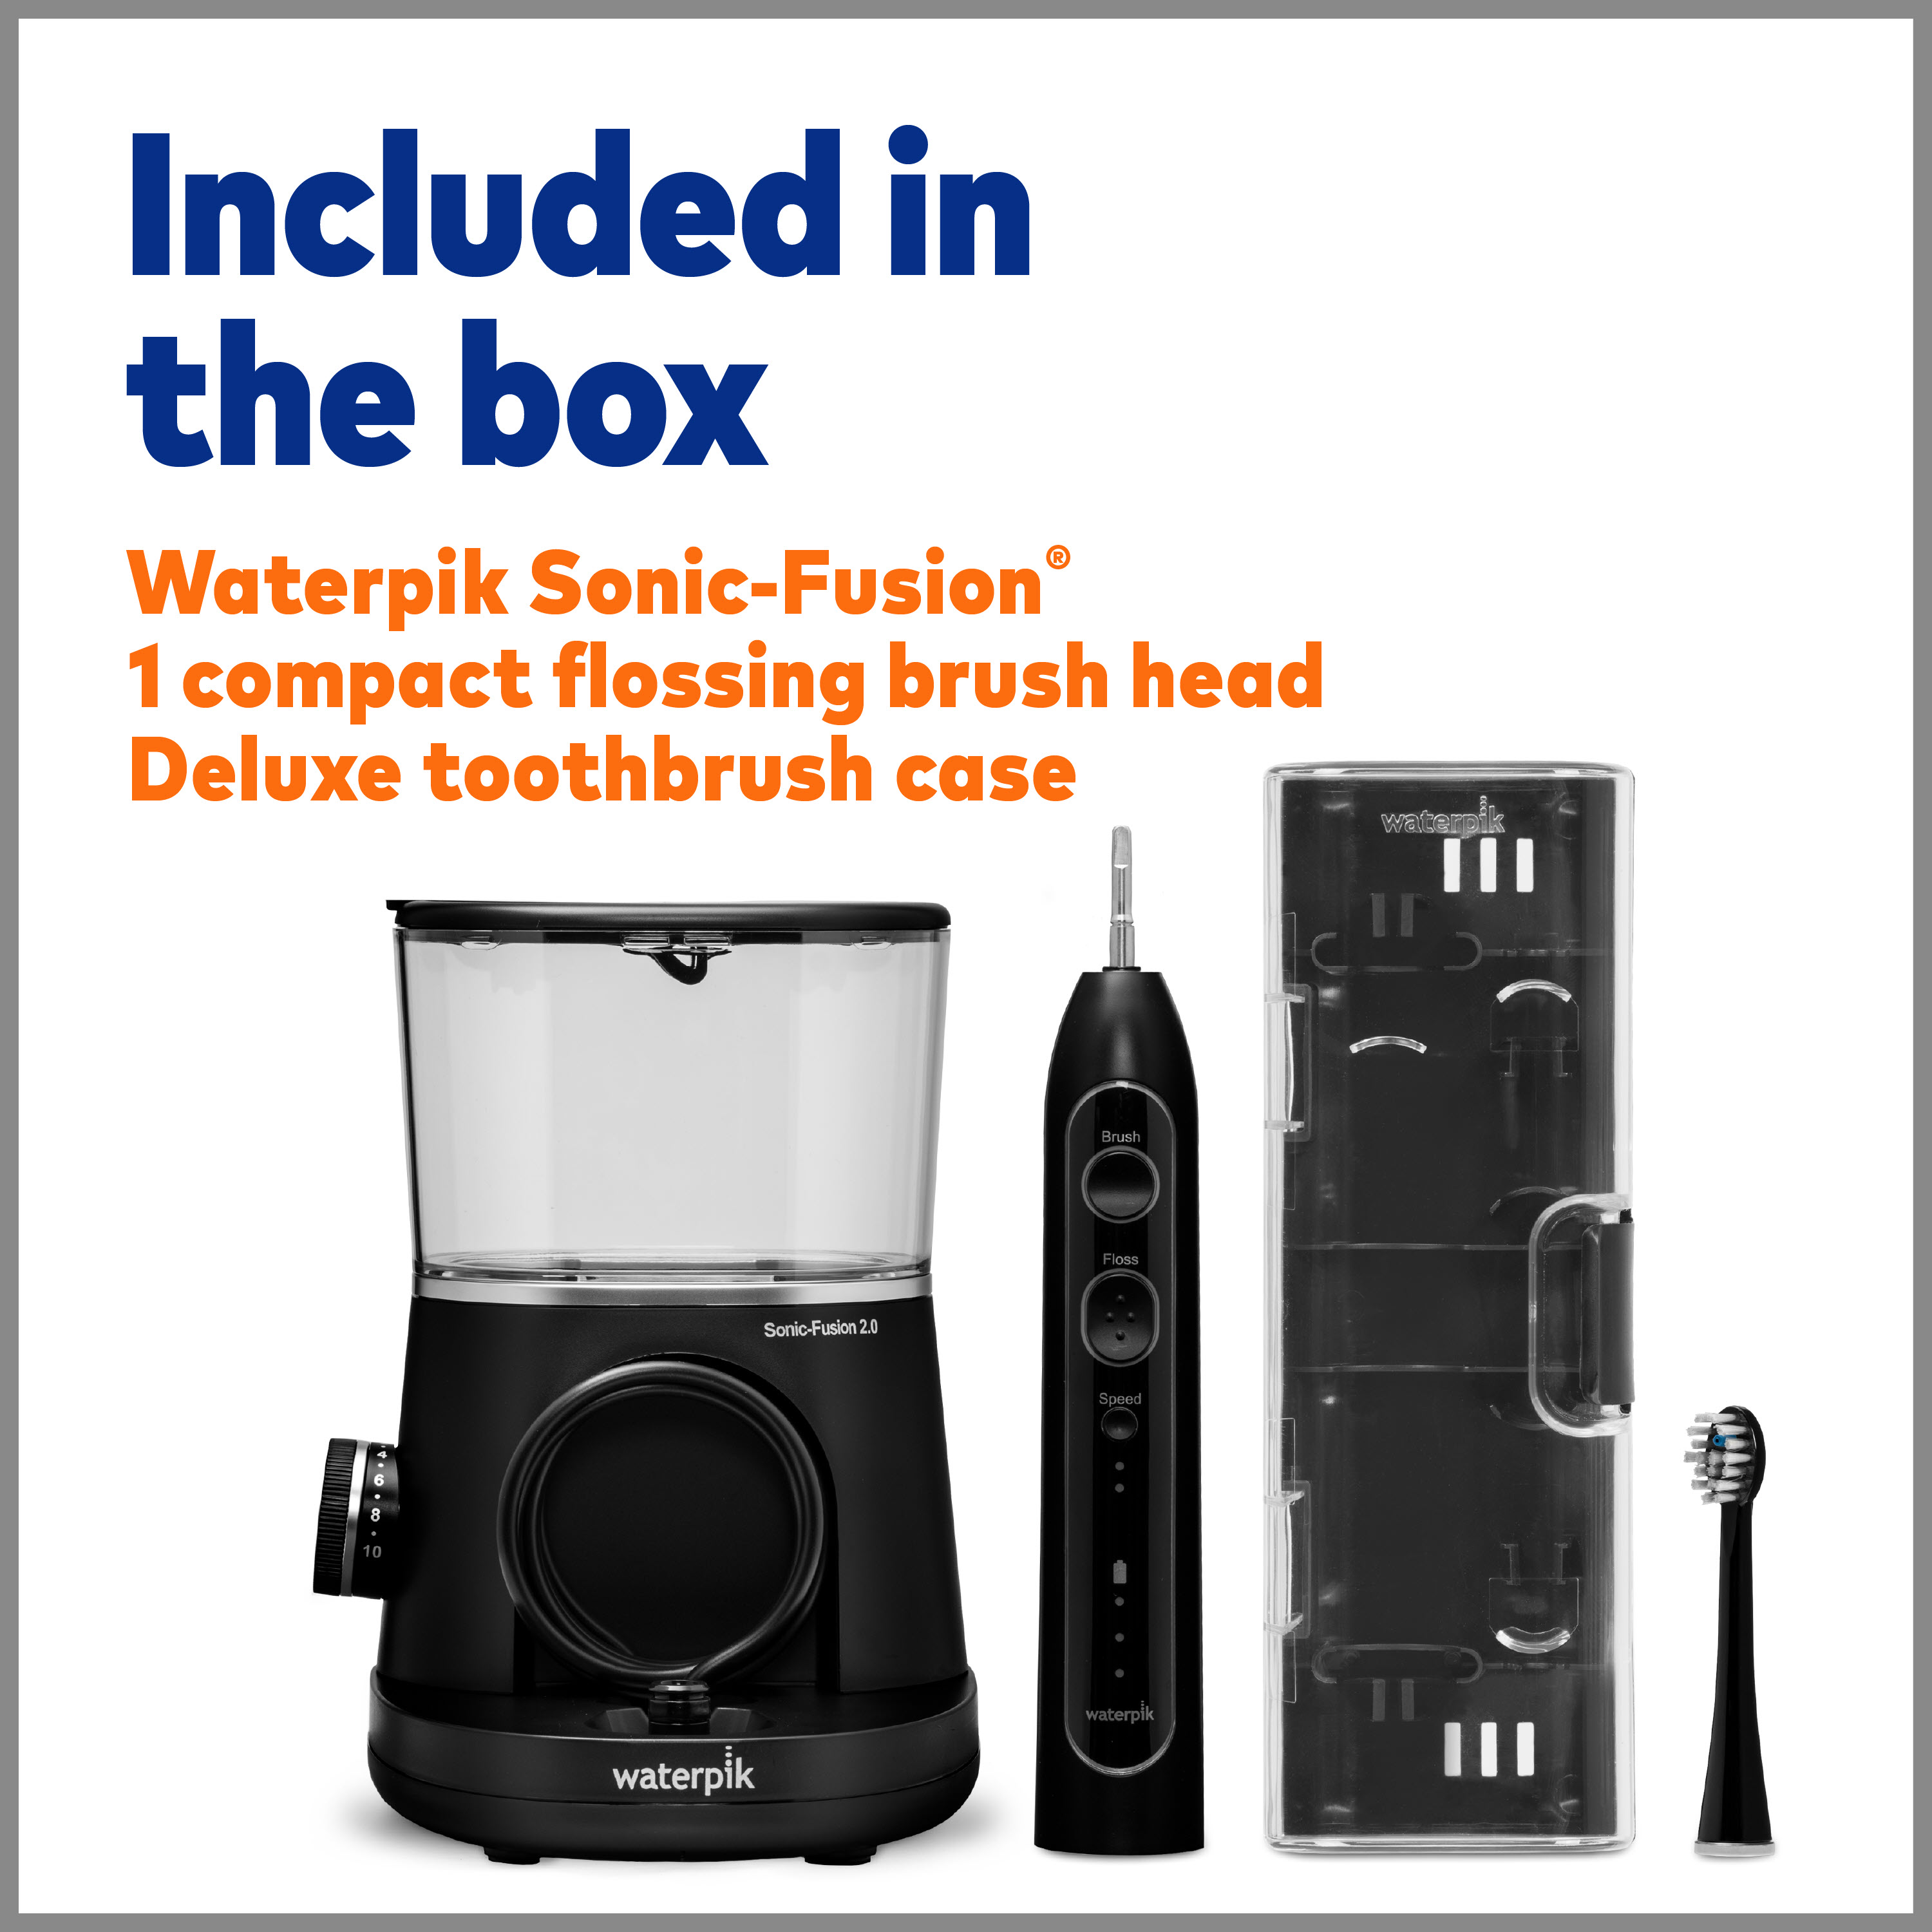 Waterpik Sonic-Fusion 2.0 Flossing Toothbrush, Electric Toothbrush & Water Flosser Combo, Black - image 4 of 13